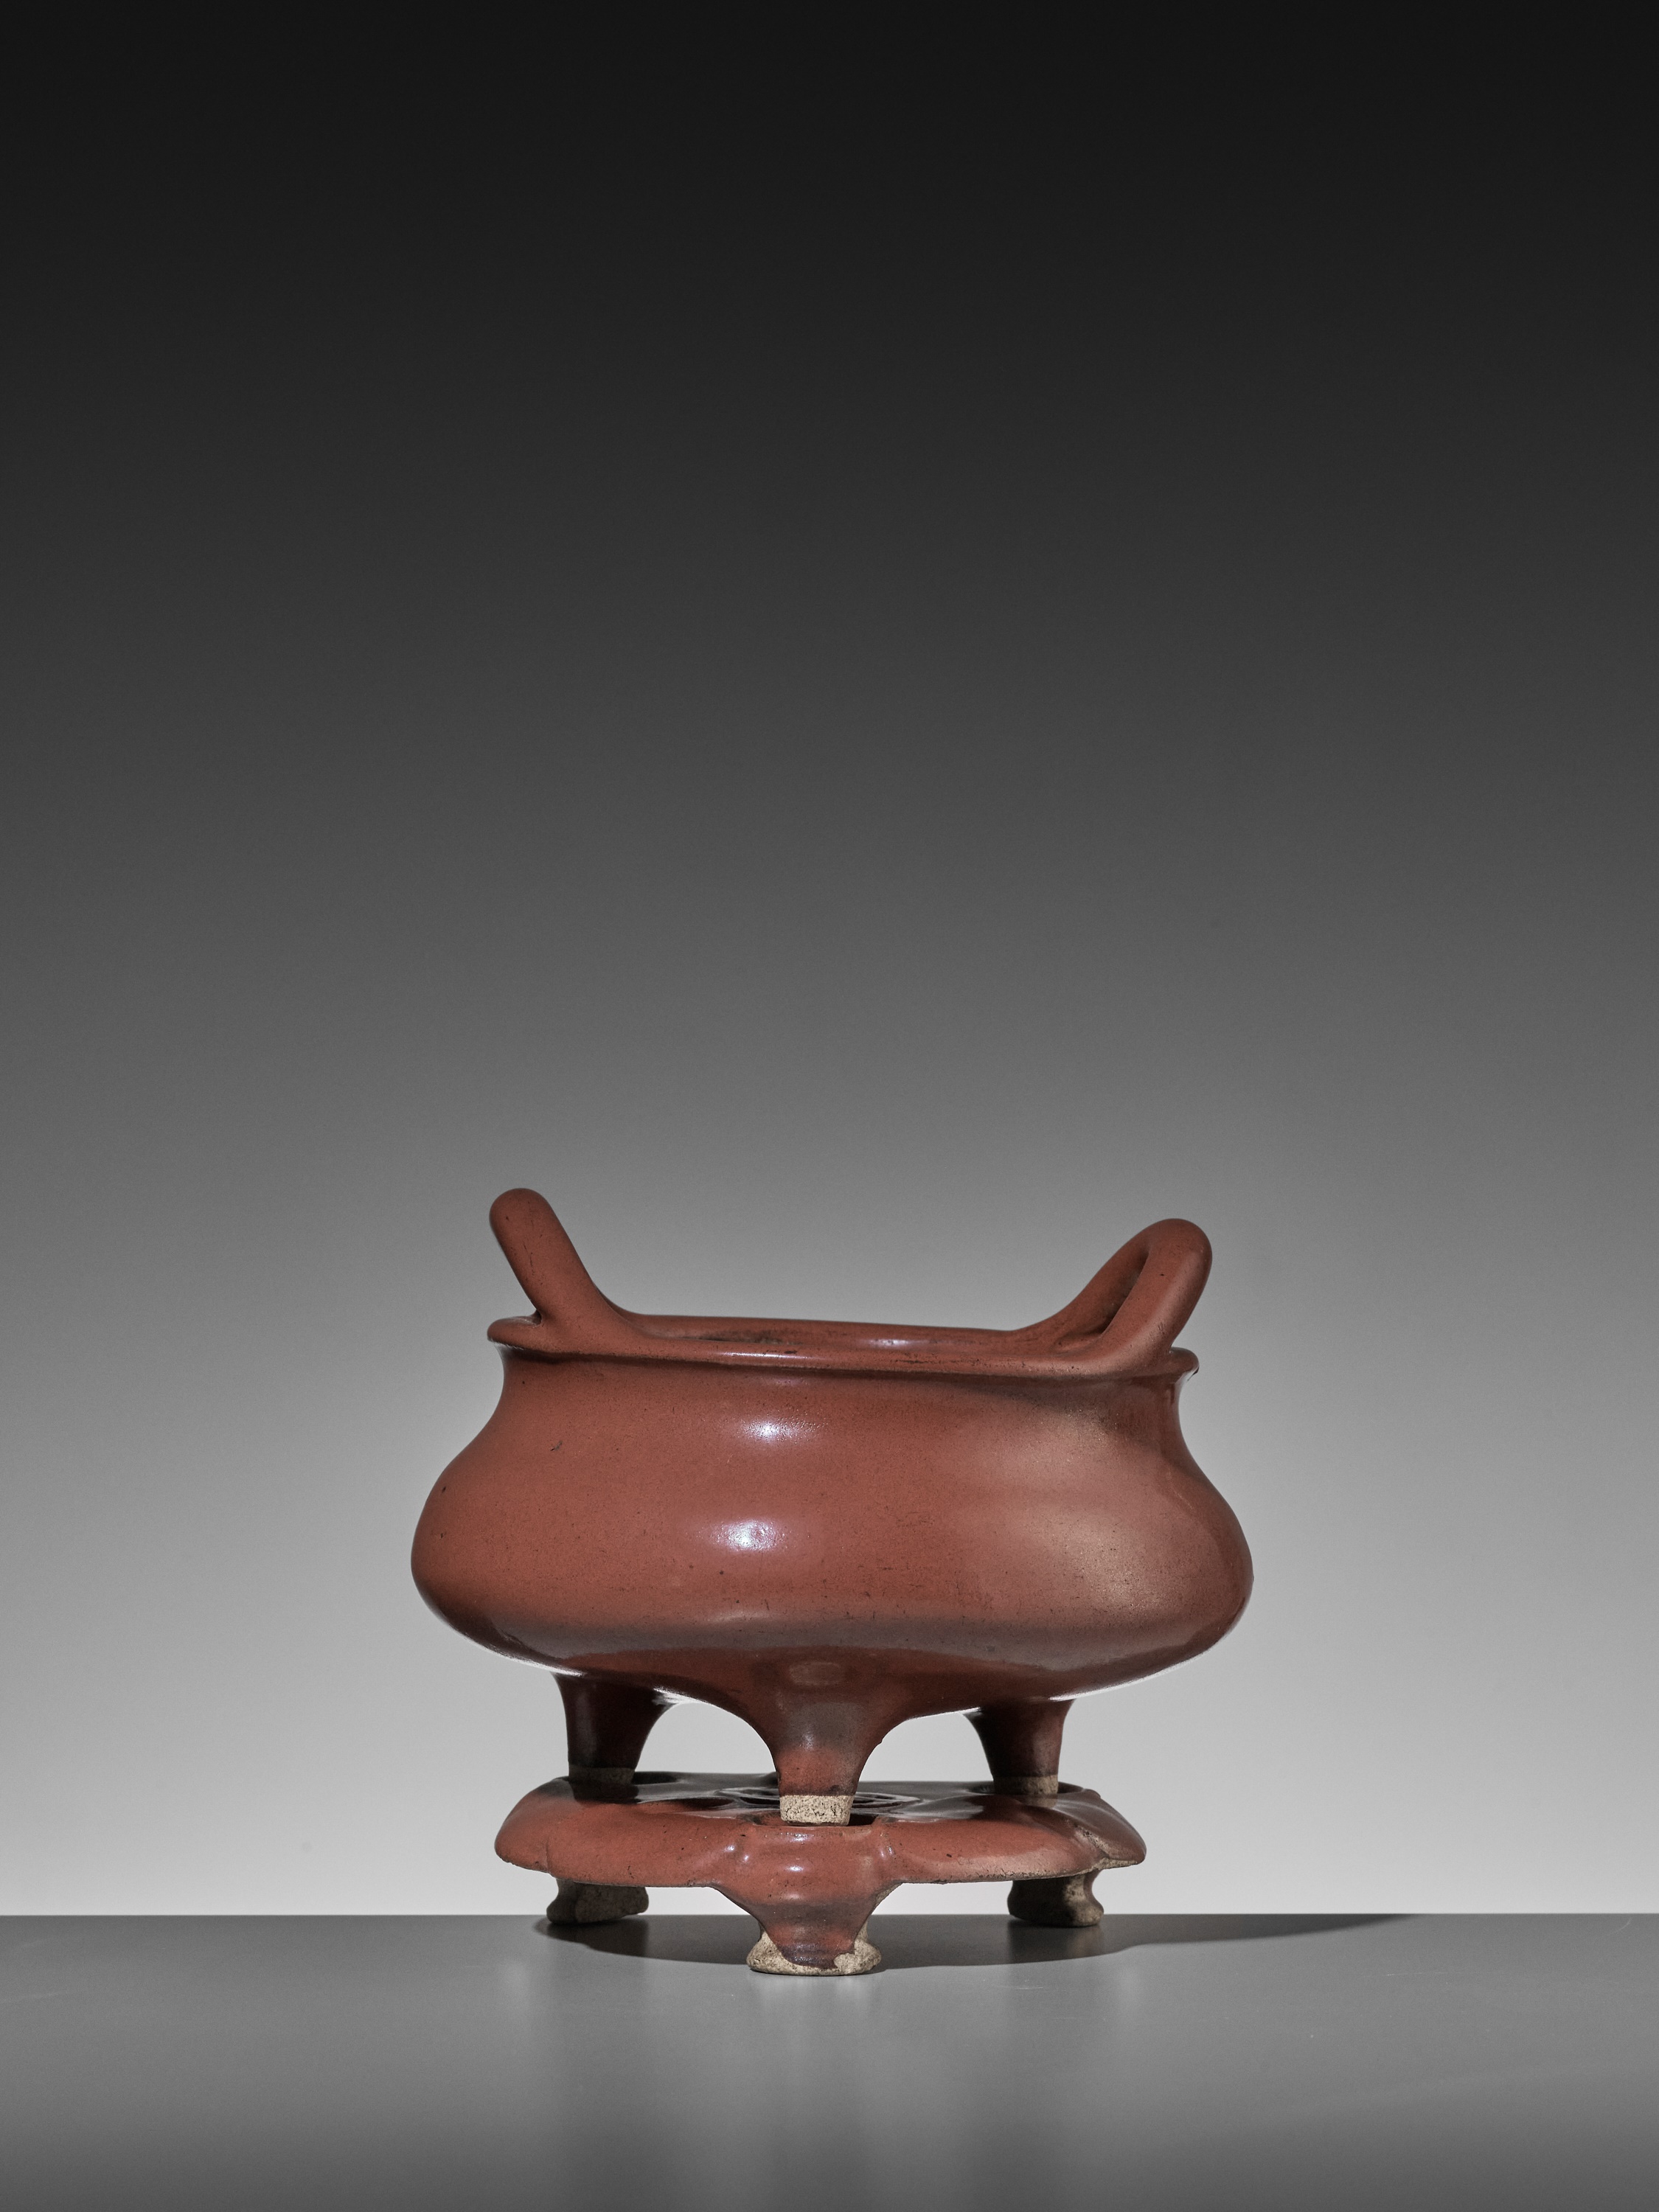 A RARE IRON-RUST GLAZED TRIPOD CENSER WITH MATCHING STAND, MID-QING - Image 5 of 12